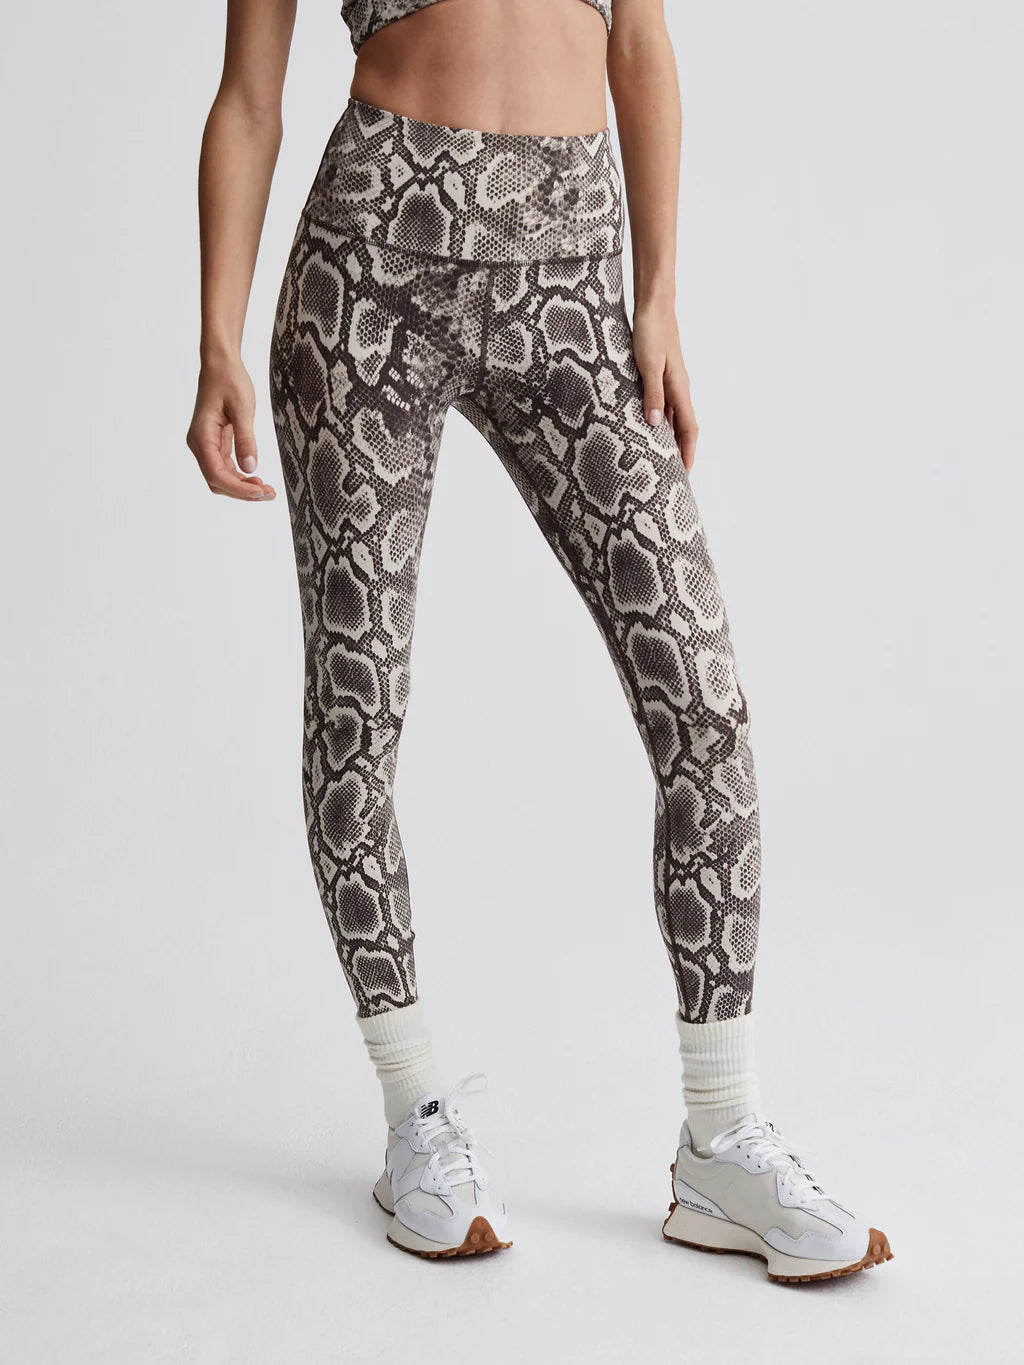 Varley Lets Move High Rise Leggings in Alabaster Lynx: XSmall